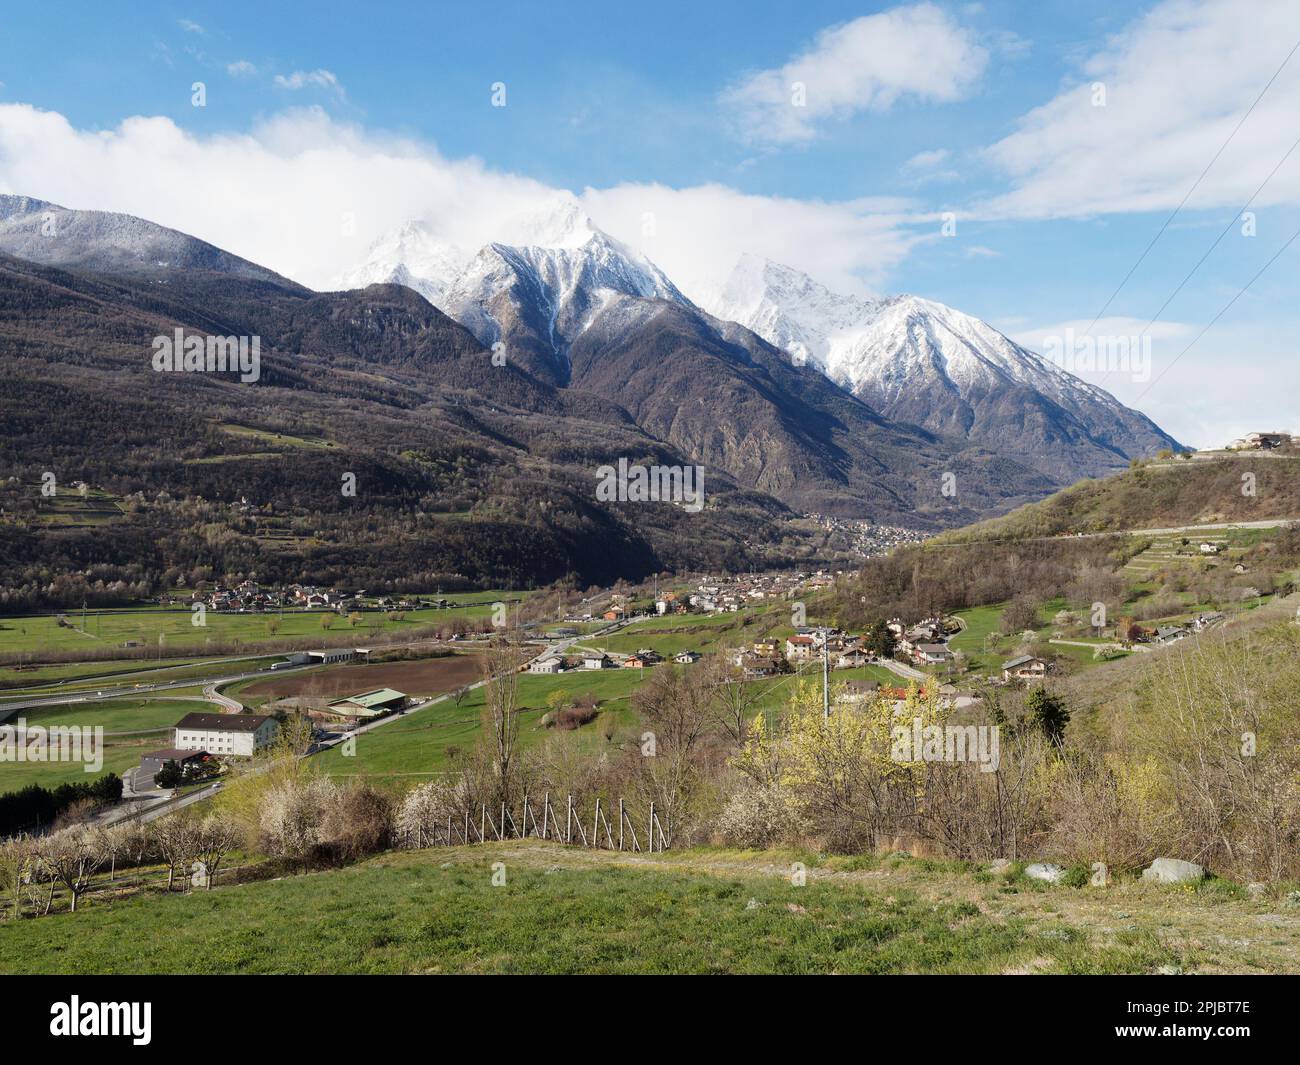 View towards Nus and snow-capped mountains behind, Aosta Valley, Italy Stock Photo